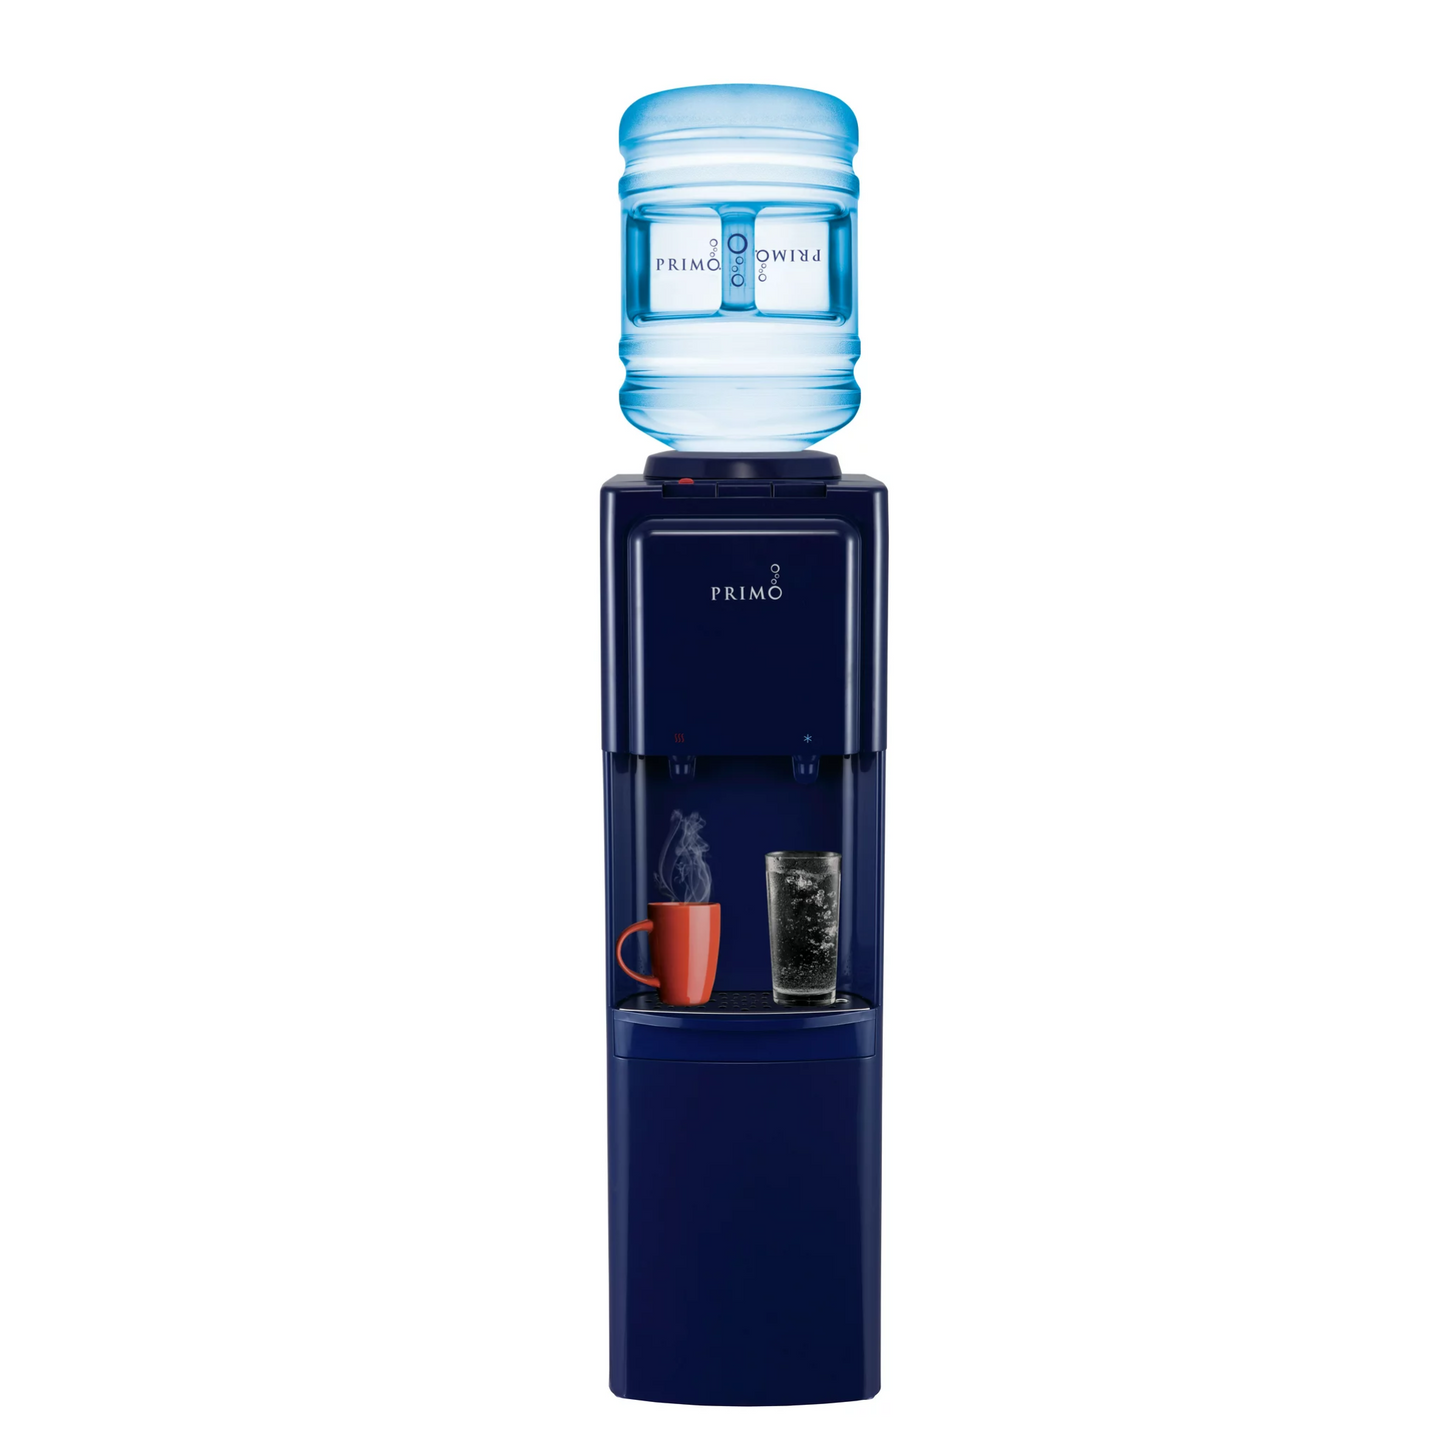 Efficient Primo Water Dispenser with Hot and Cold Temperature Settings in Navy